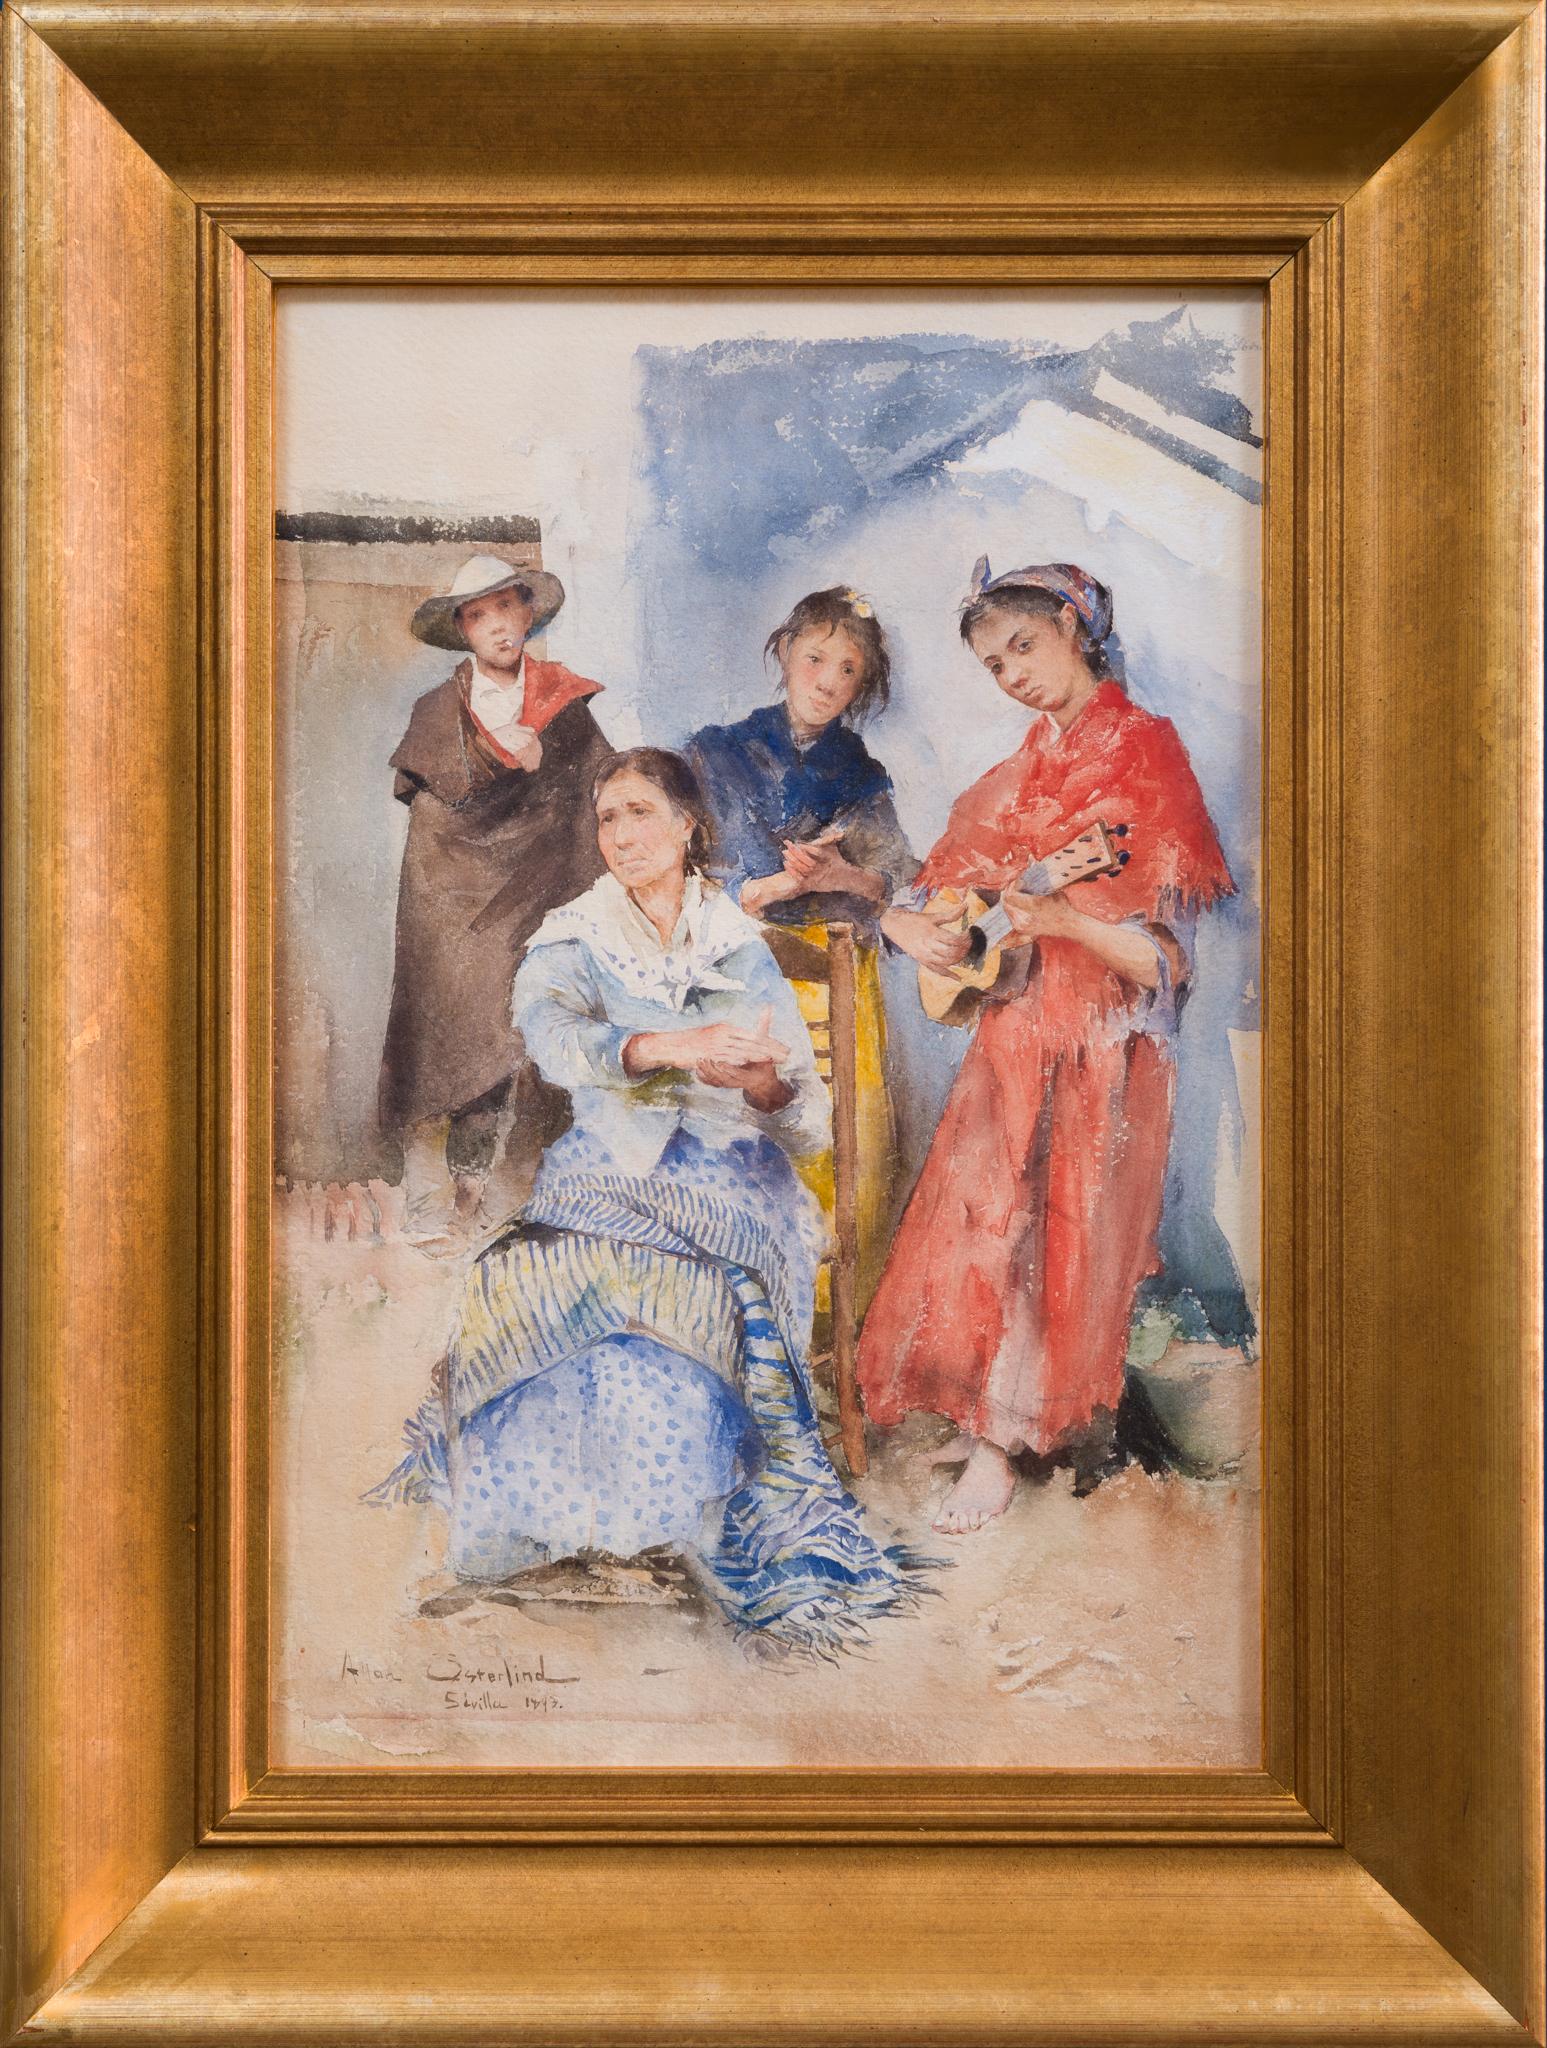 Allan Österlind, a Swedish artist who became a well known figure in French art circles, beautifully captures the essence of Andalusian culture in his 1893 watercolor painting, "Sevilla." Born to Per August Österlind and Johanna Petronella Skoog,